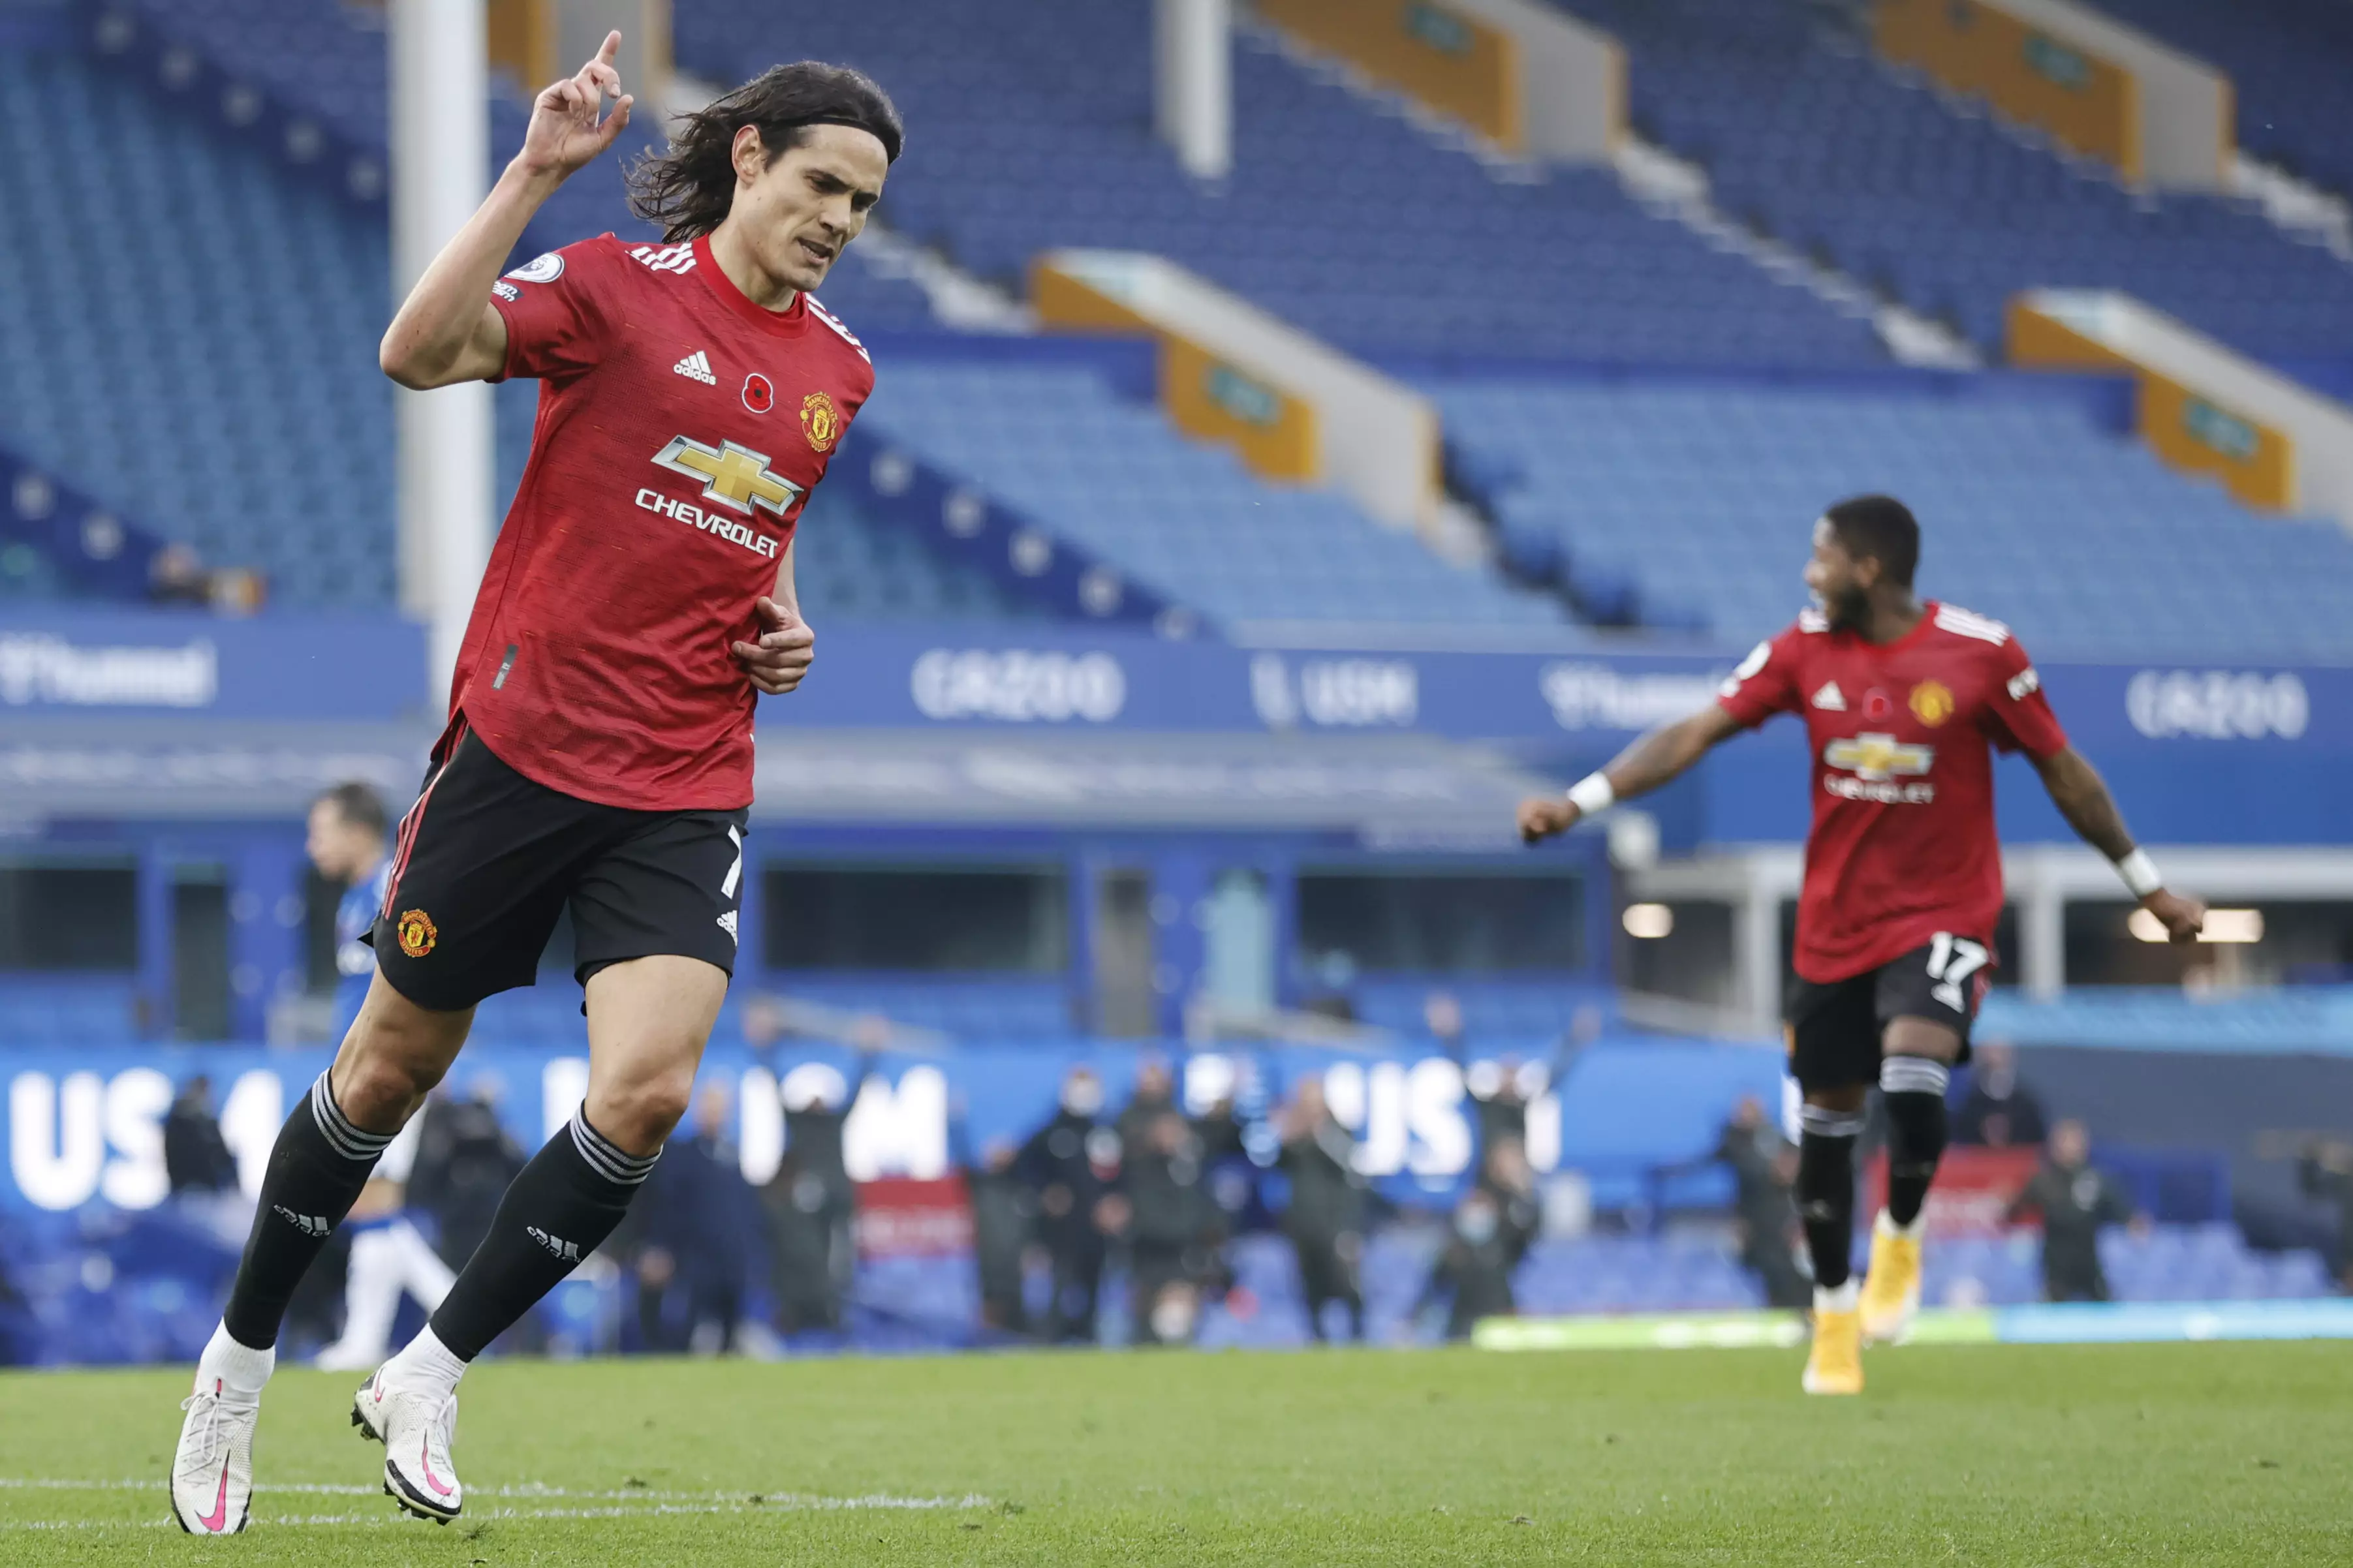 Cavani celebrates his first goal for United. Image: PA Images